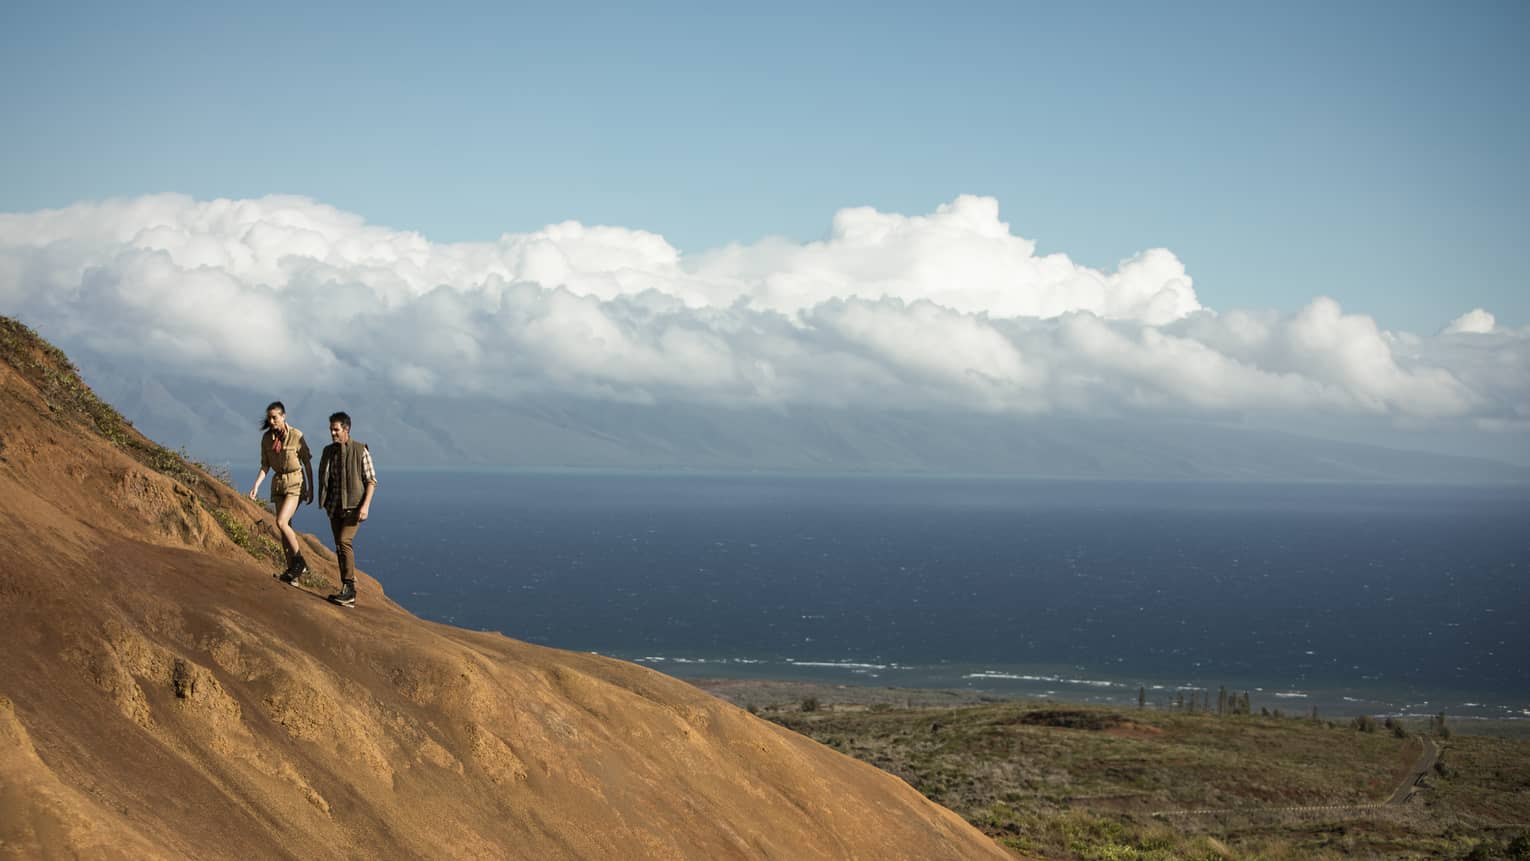 Two hikers climb a large sand dune, puffy white clouds and the ocean looming in the background